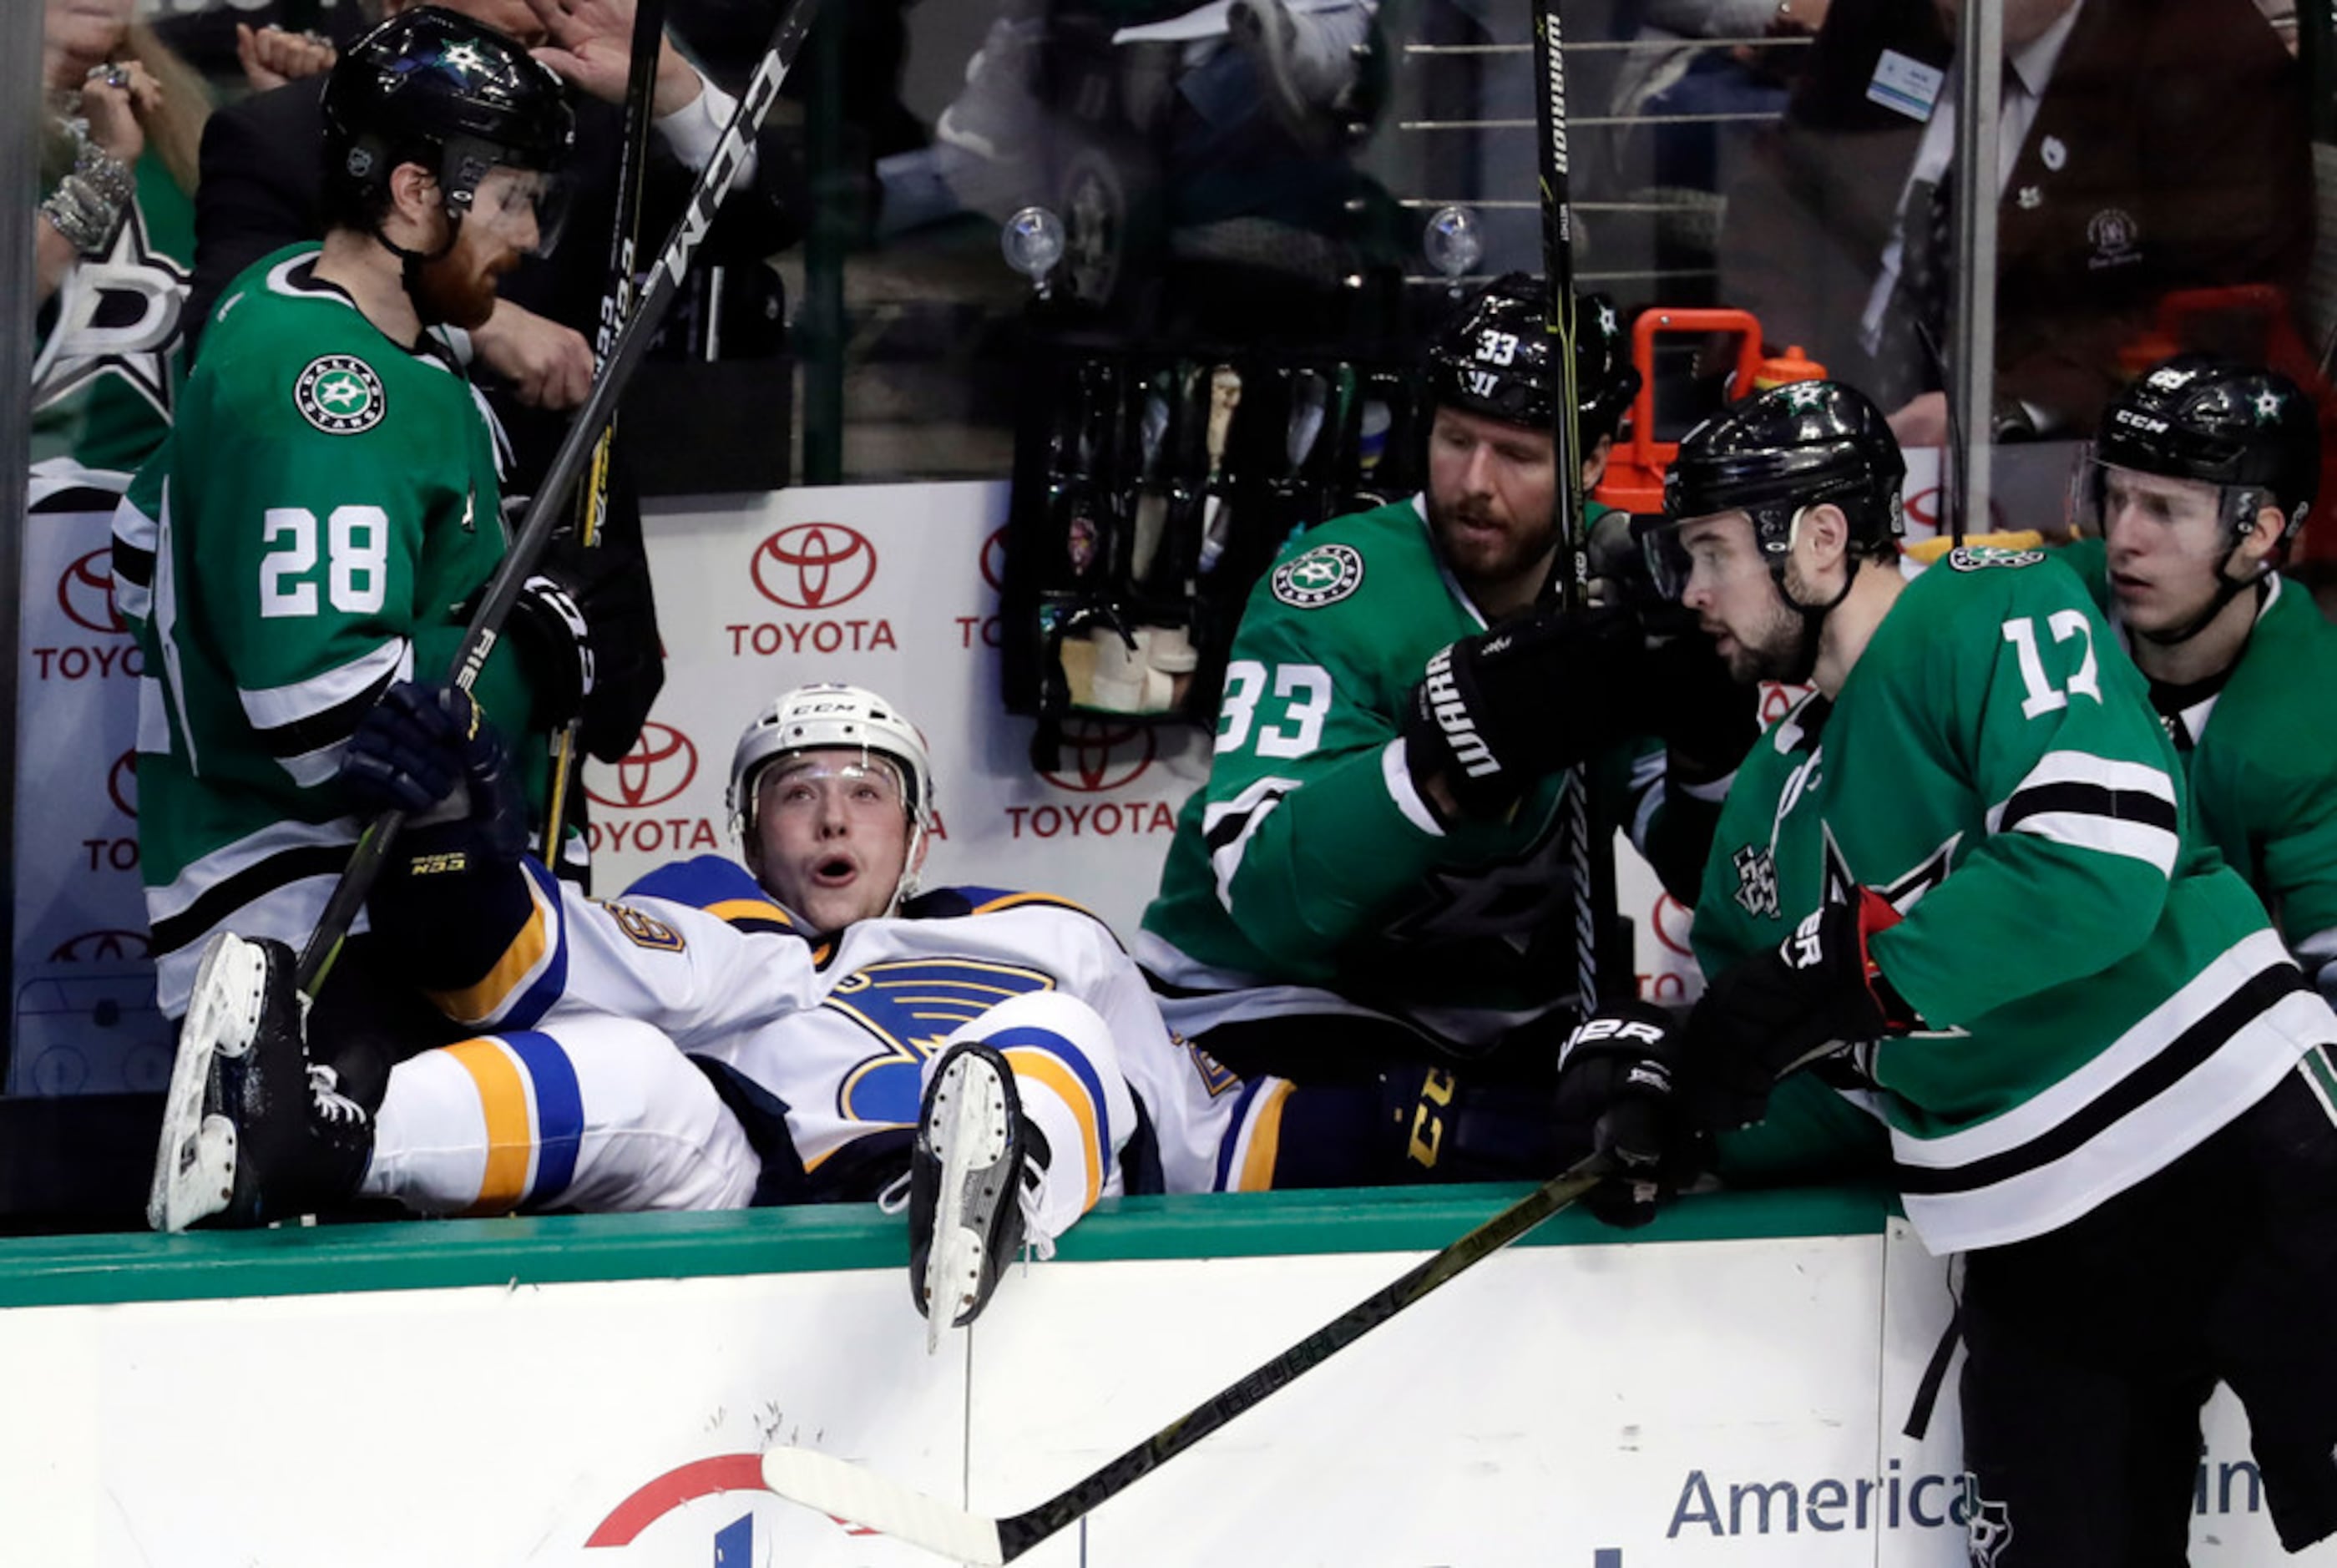 St. Louis Blues Should Pass On Jaden Schwartz, But Probably Can't